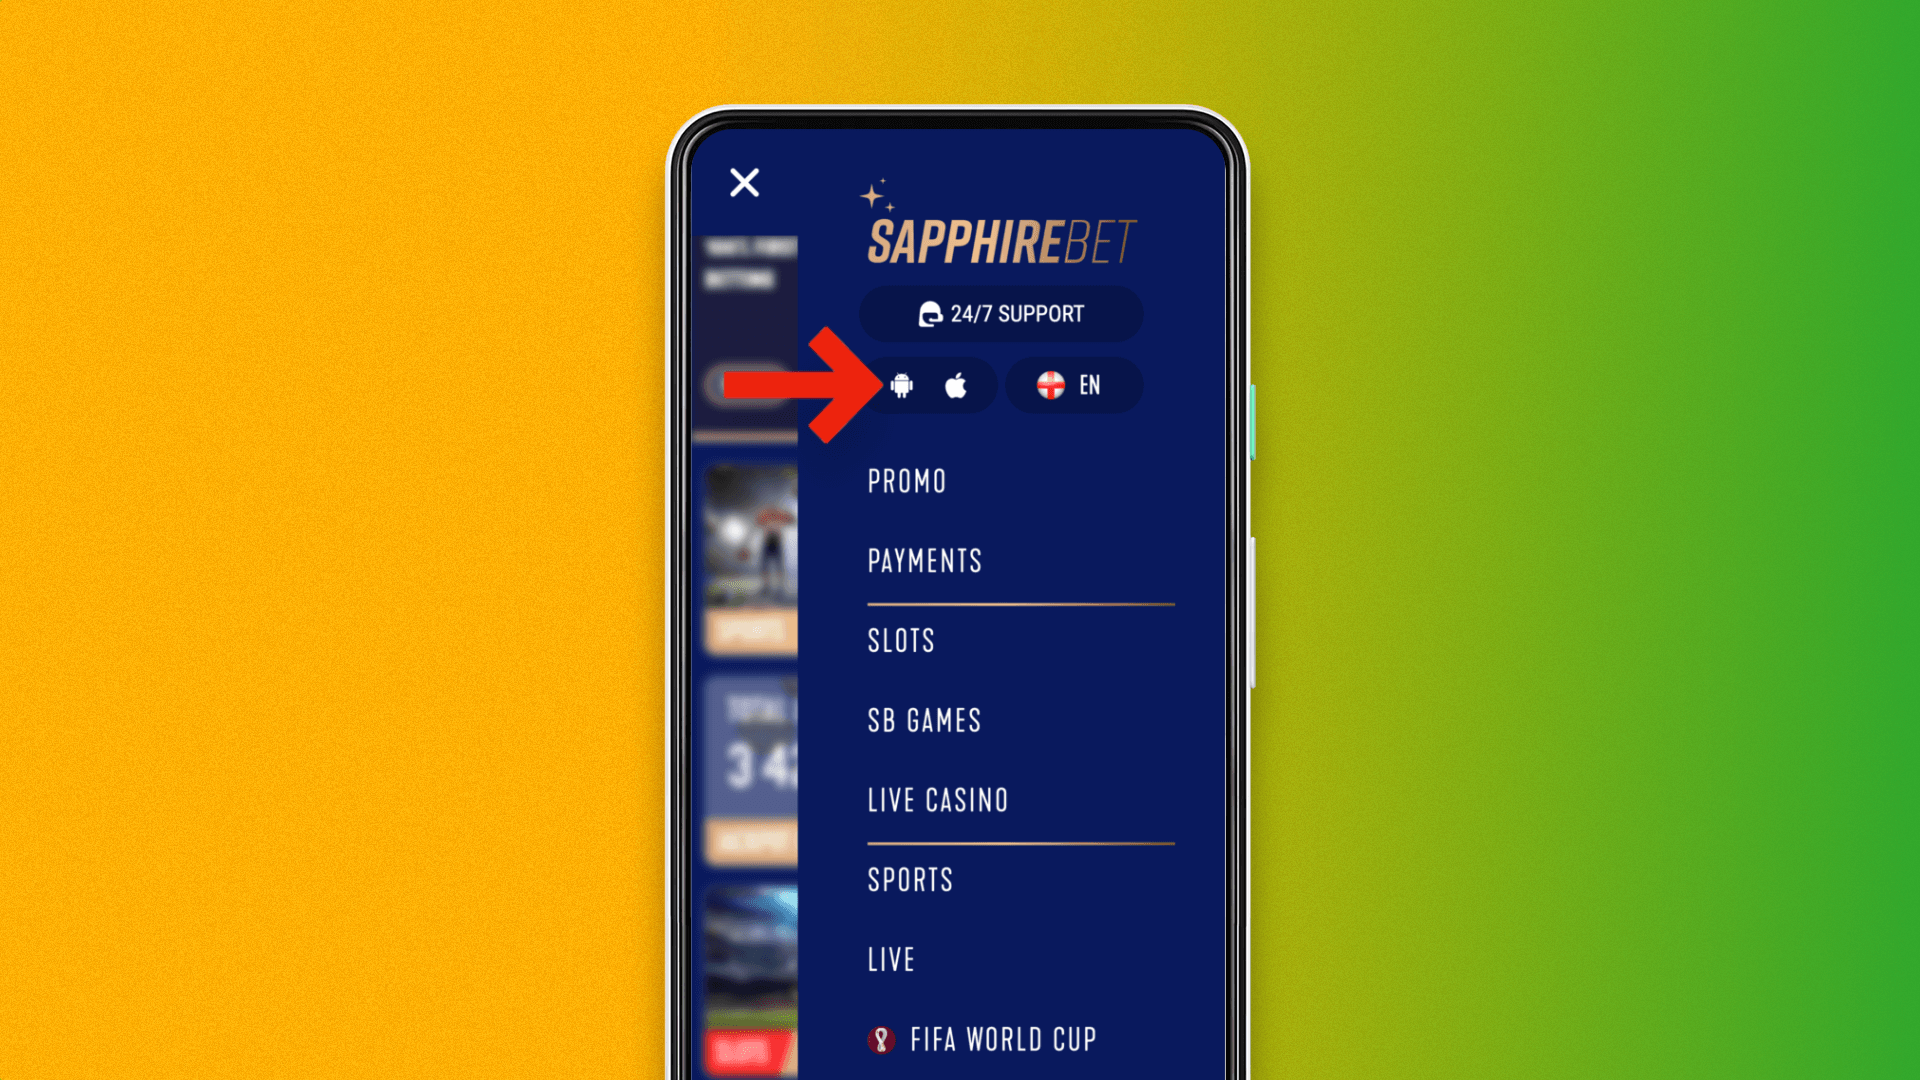 Go to the special section with applications on the SapphireBet website to download the application for Android